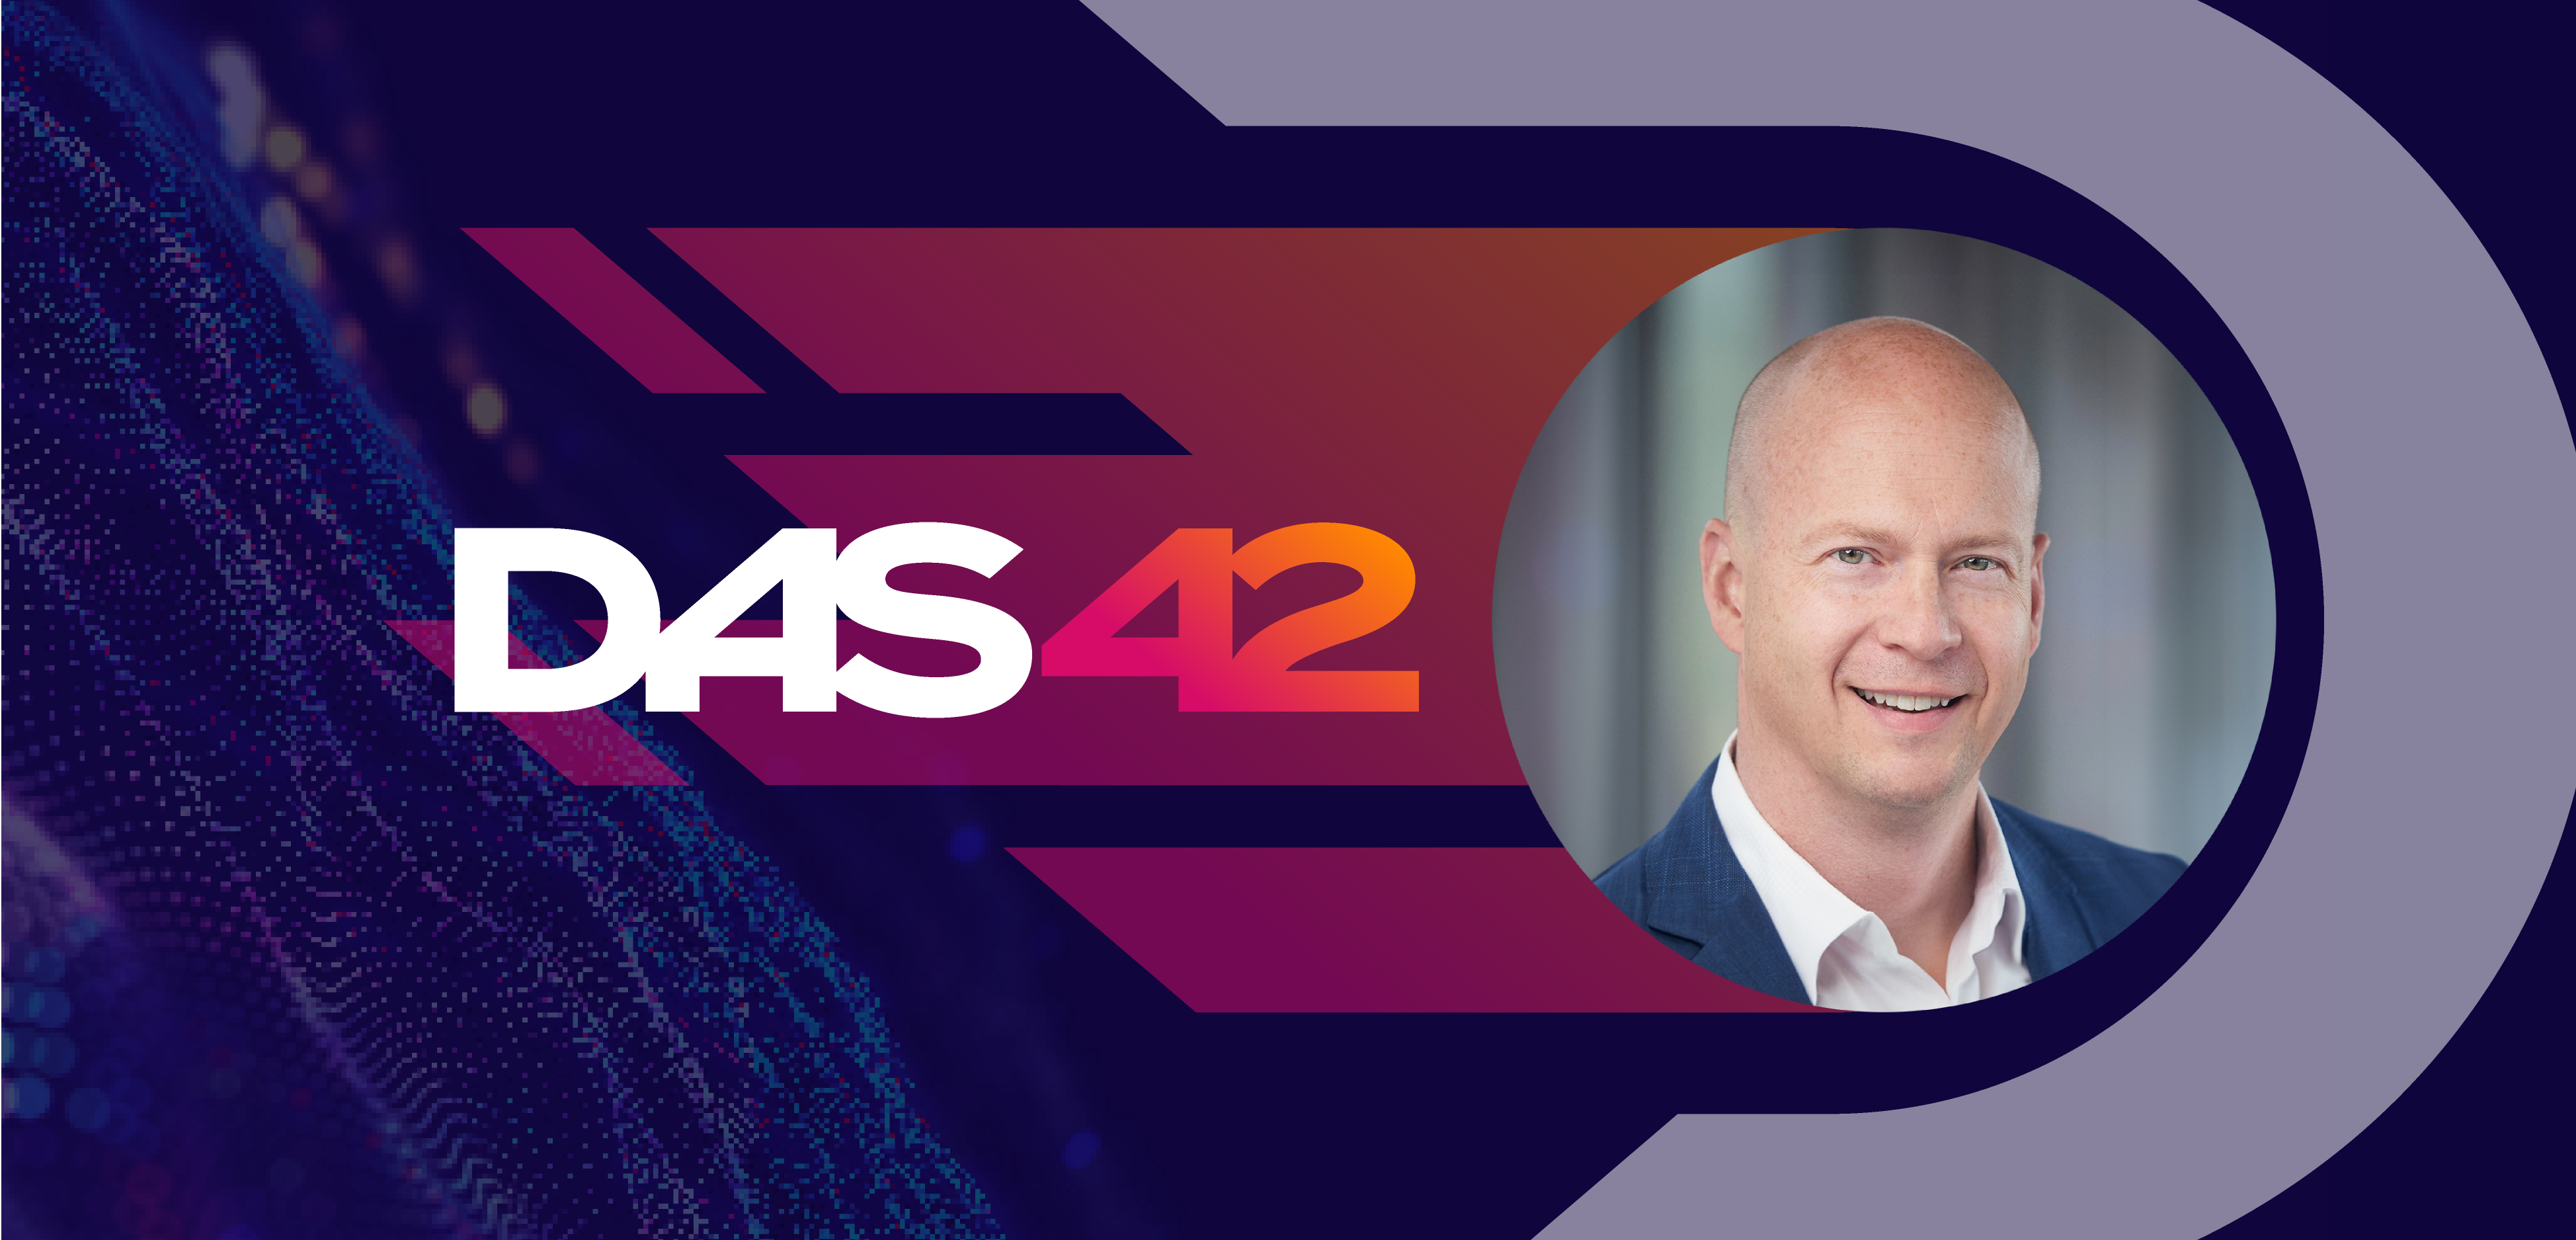 Featured image for “Industry Veteran Frank Farrall Joins DAS42 as CEO to Drive Innovation and Growth”